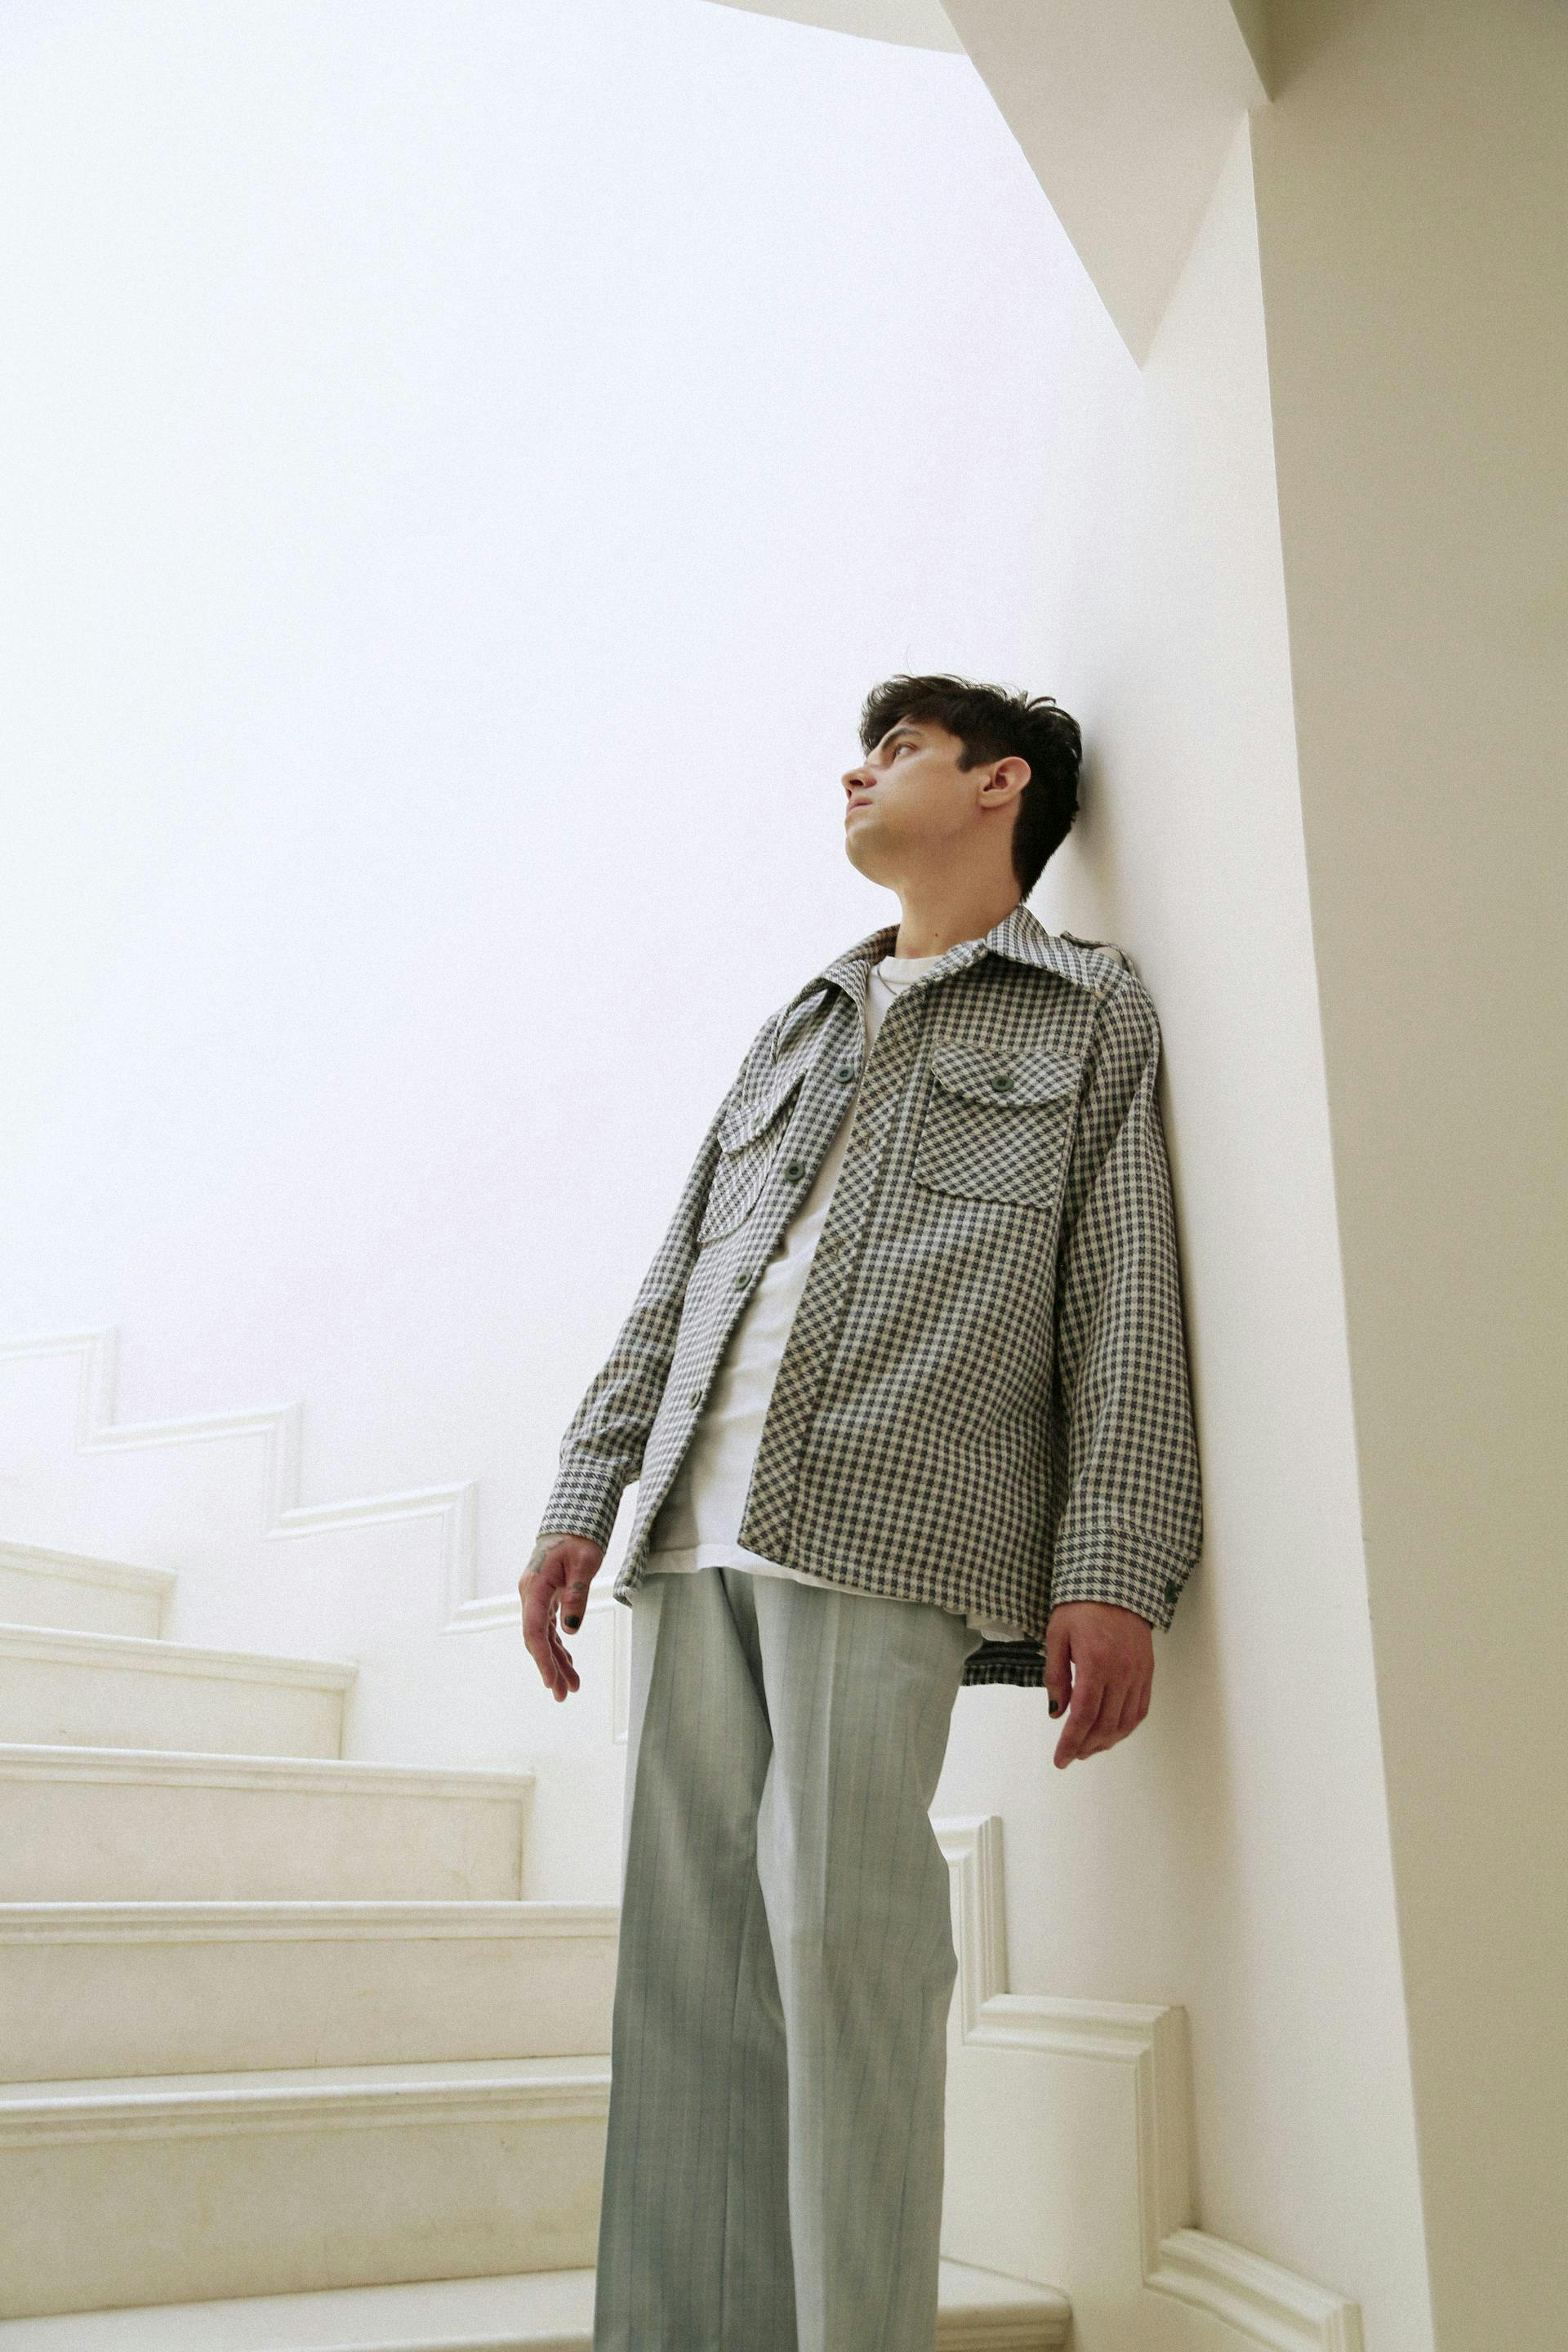 clothing apparel sleeve person human long sleeve handrail banister home decor